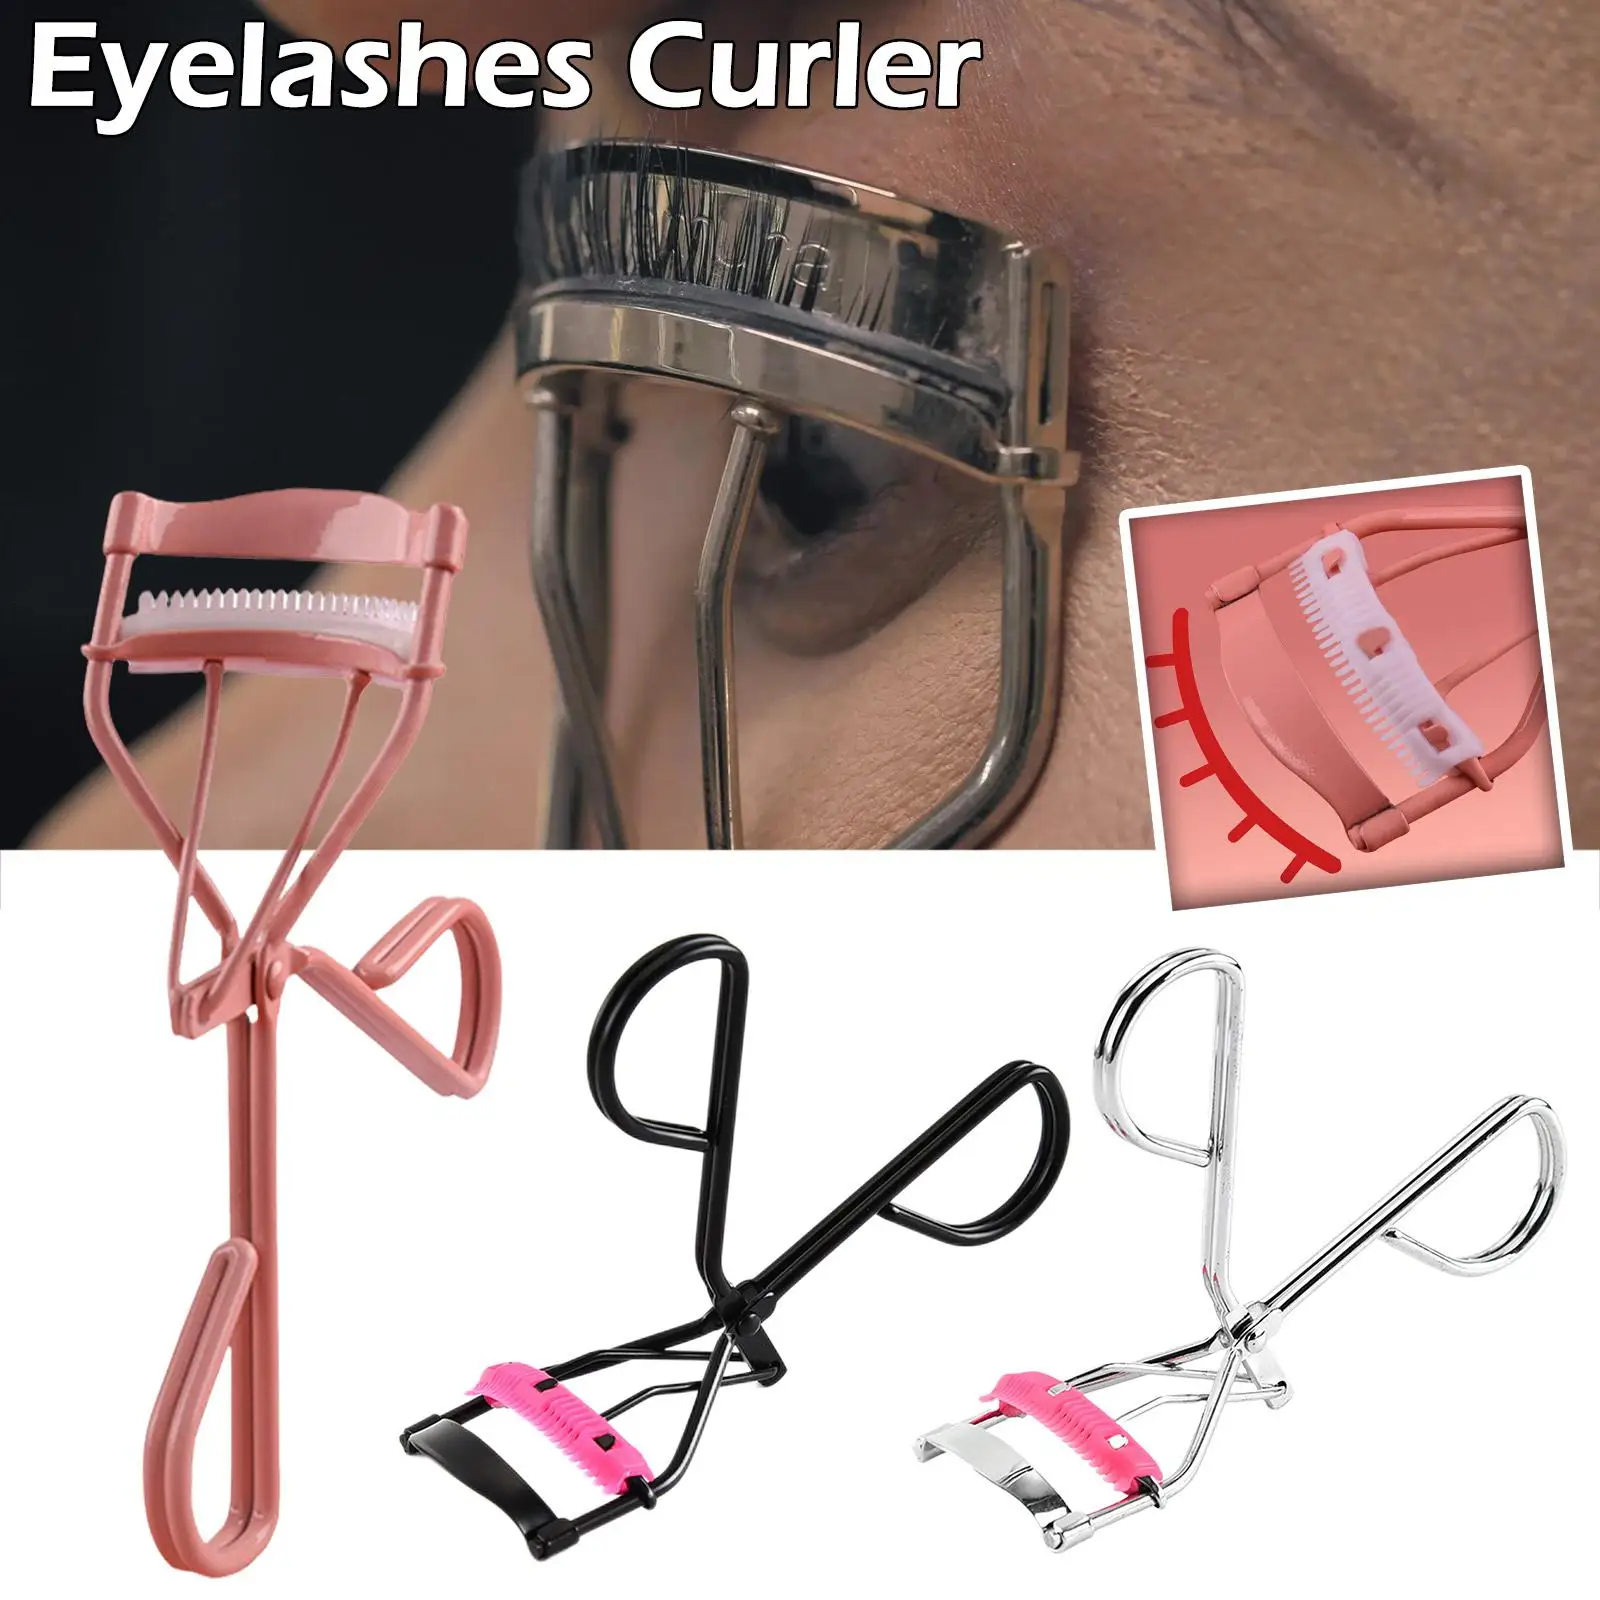 

Eyelashes Curler with Built In Comb Separated Eyelashes Makeup Crimp-free Curler Pads lashes Eye Curlers with Lash 2 Refill D7T9